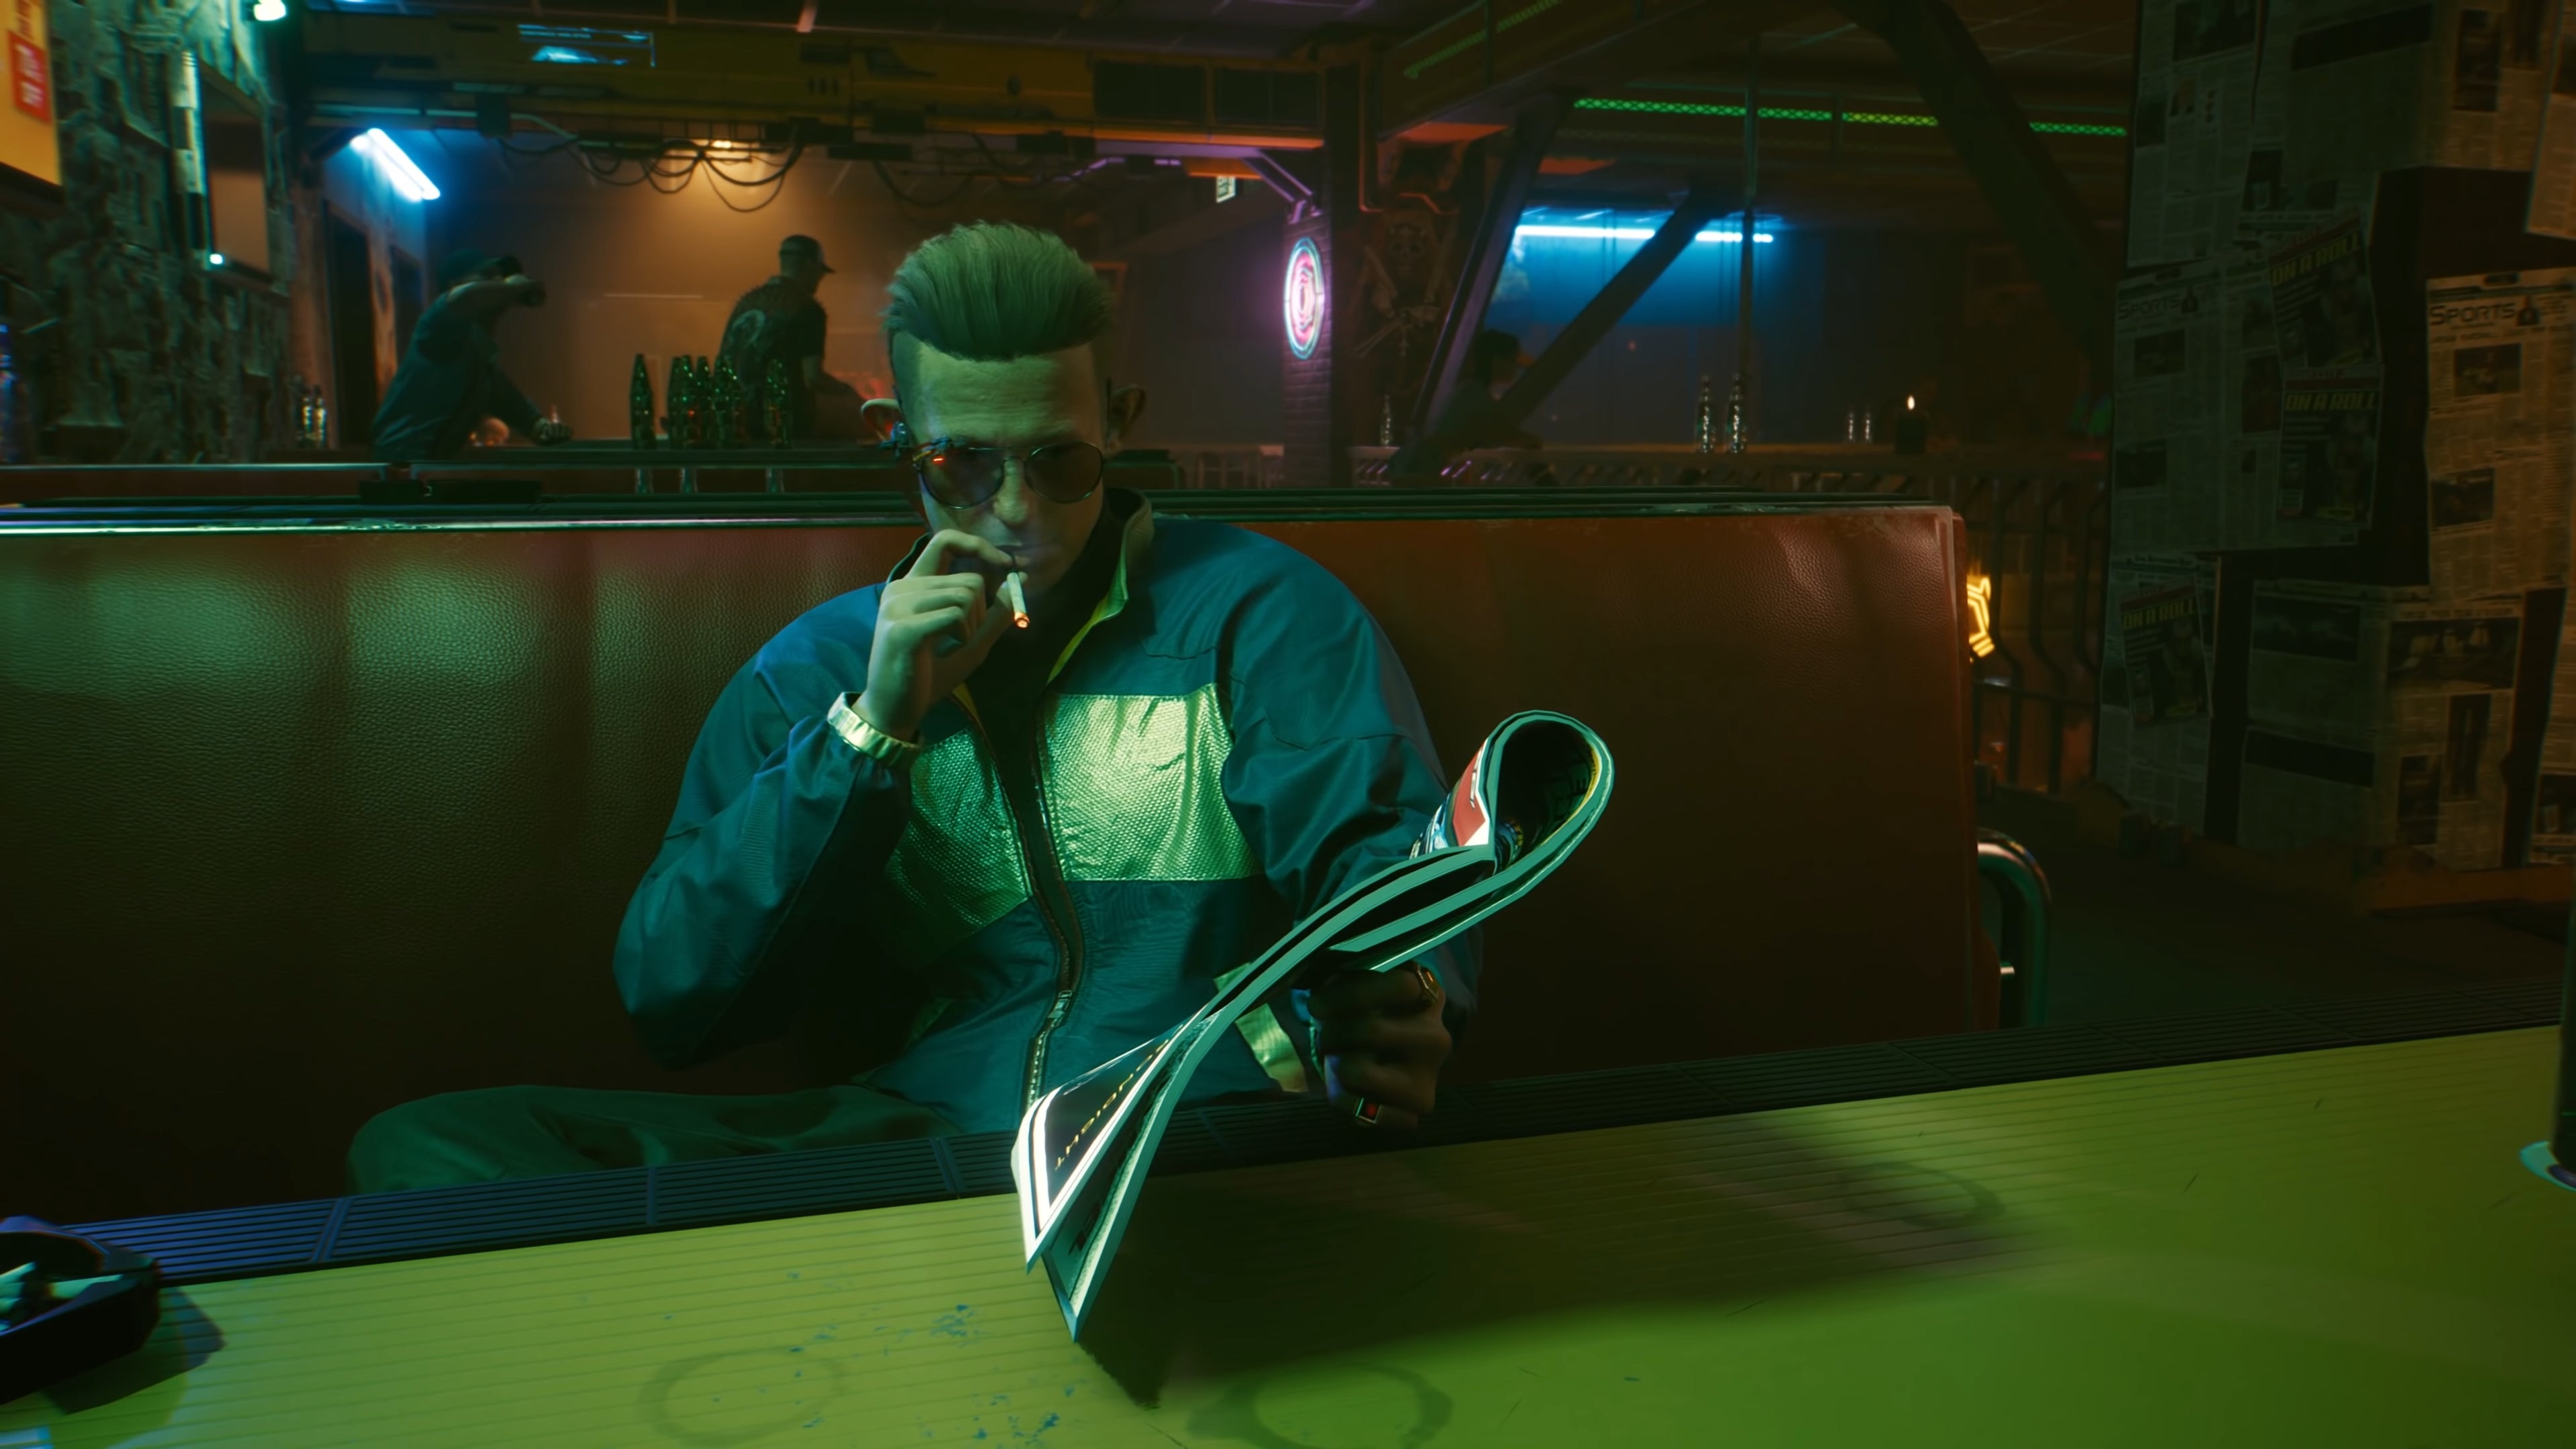 The player in Cyberpunk 2077 sits in a bar and speaks to Kirk, a character from the Street Kid prologue mission.